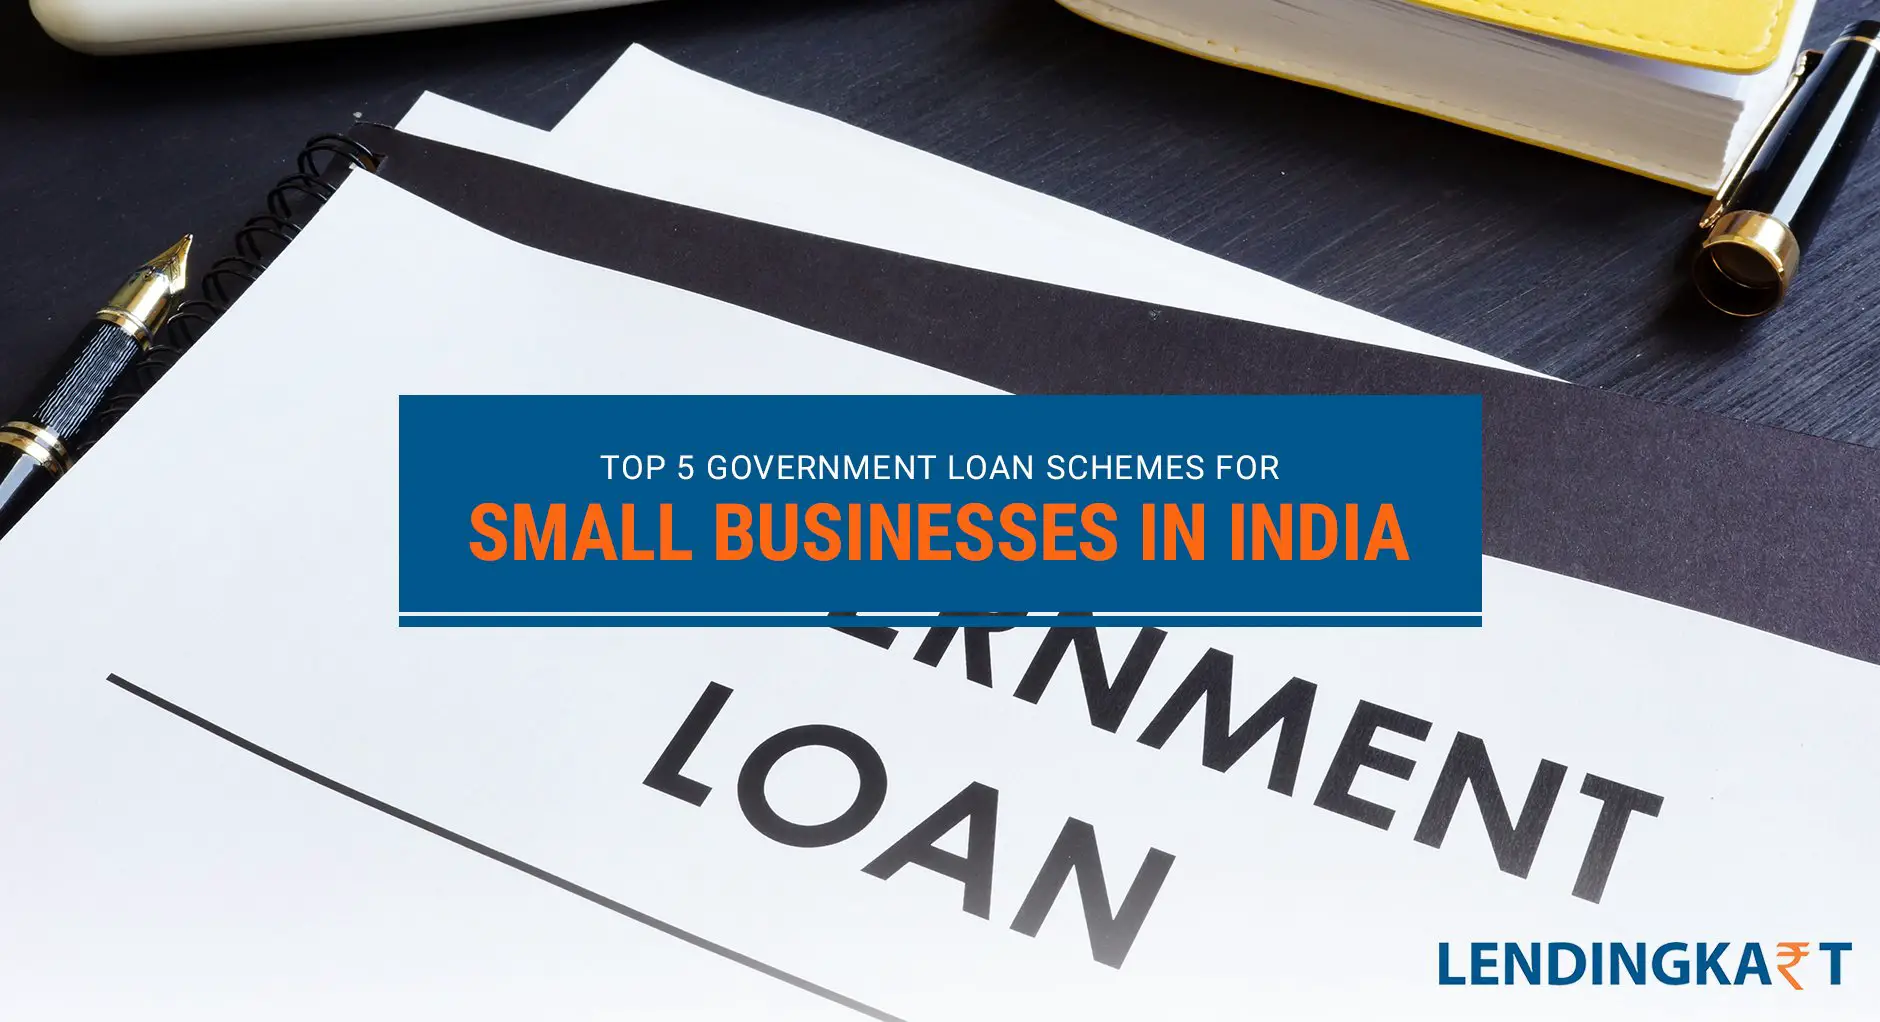 Top 5 Government Loan Schemes for Small Businesses India